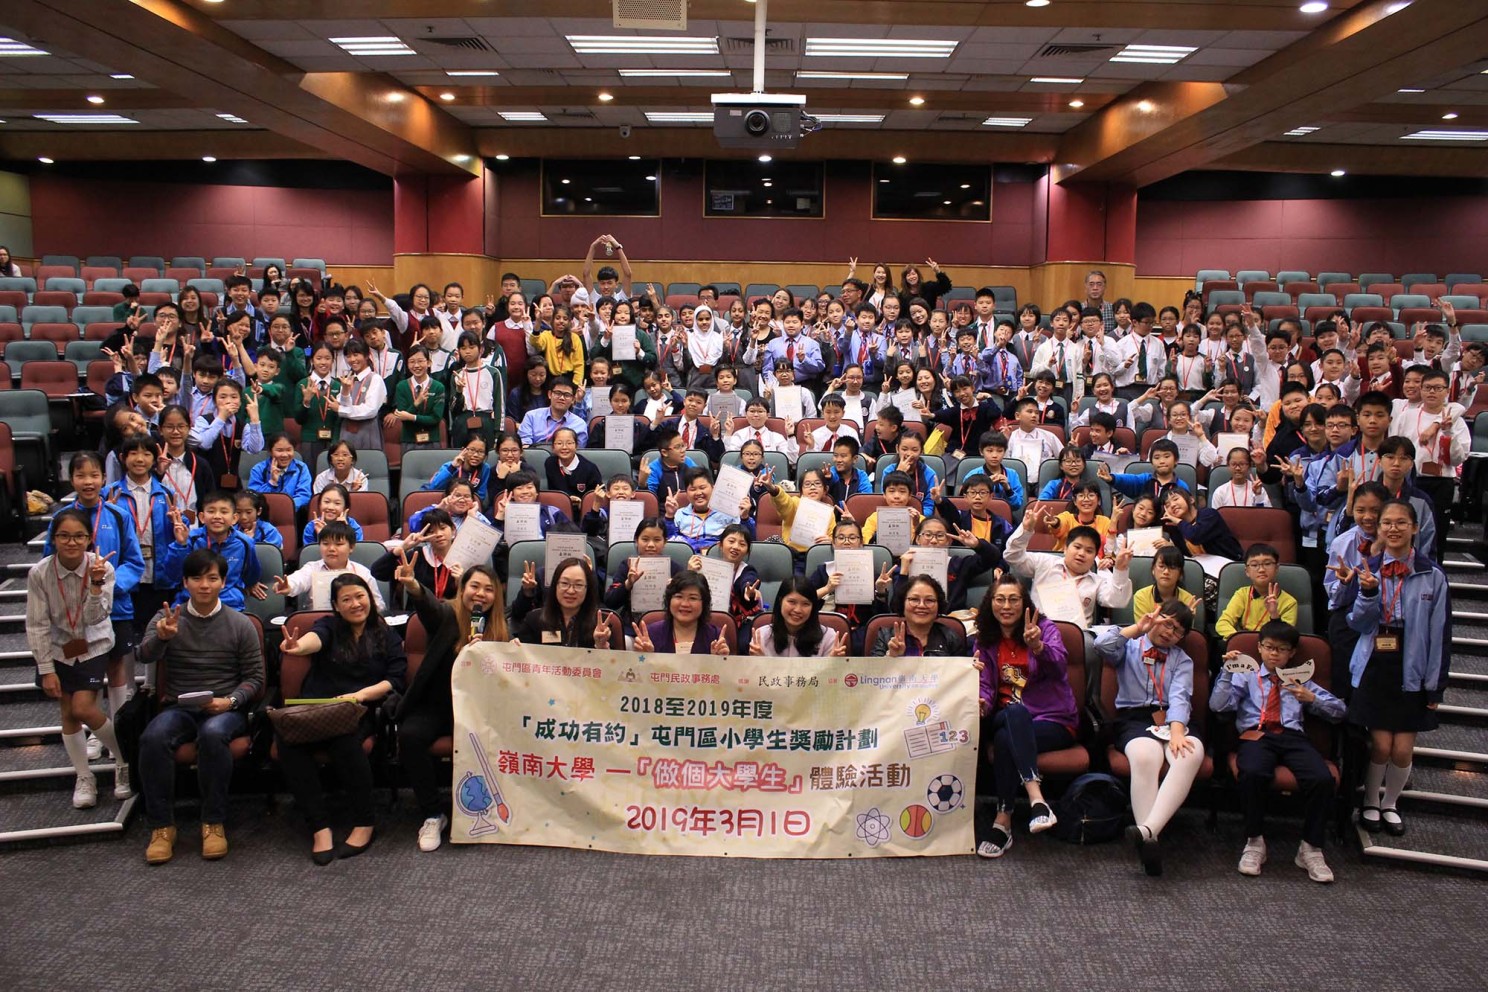 Some 100 primary school students in Tuen Mun district visit Lingnan to experience liberal arts education.